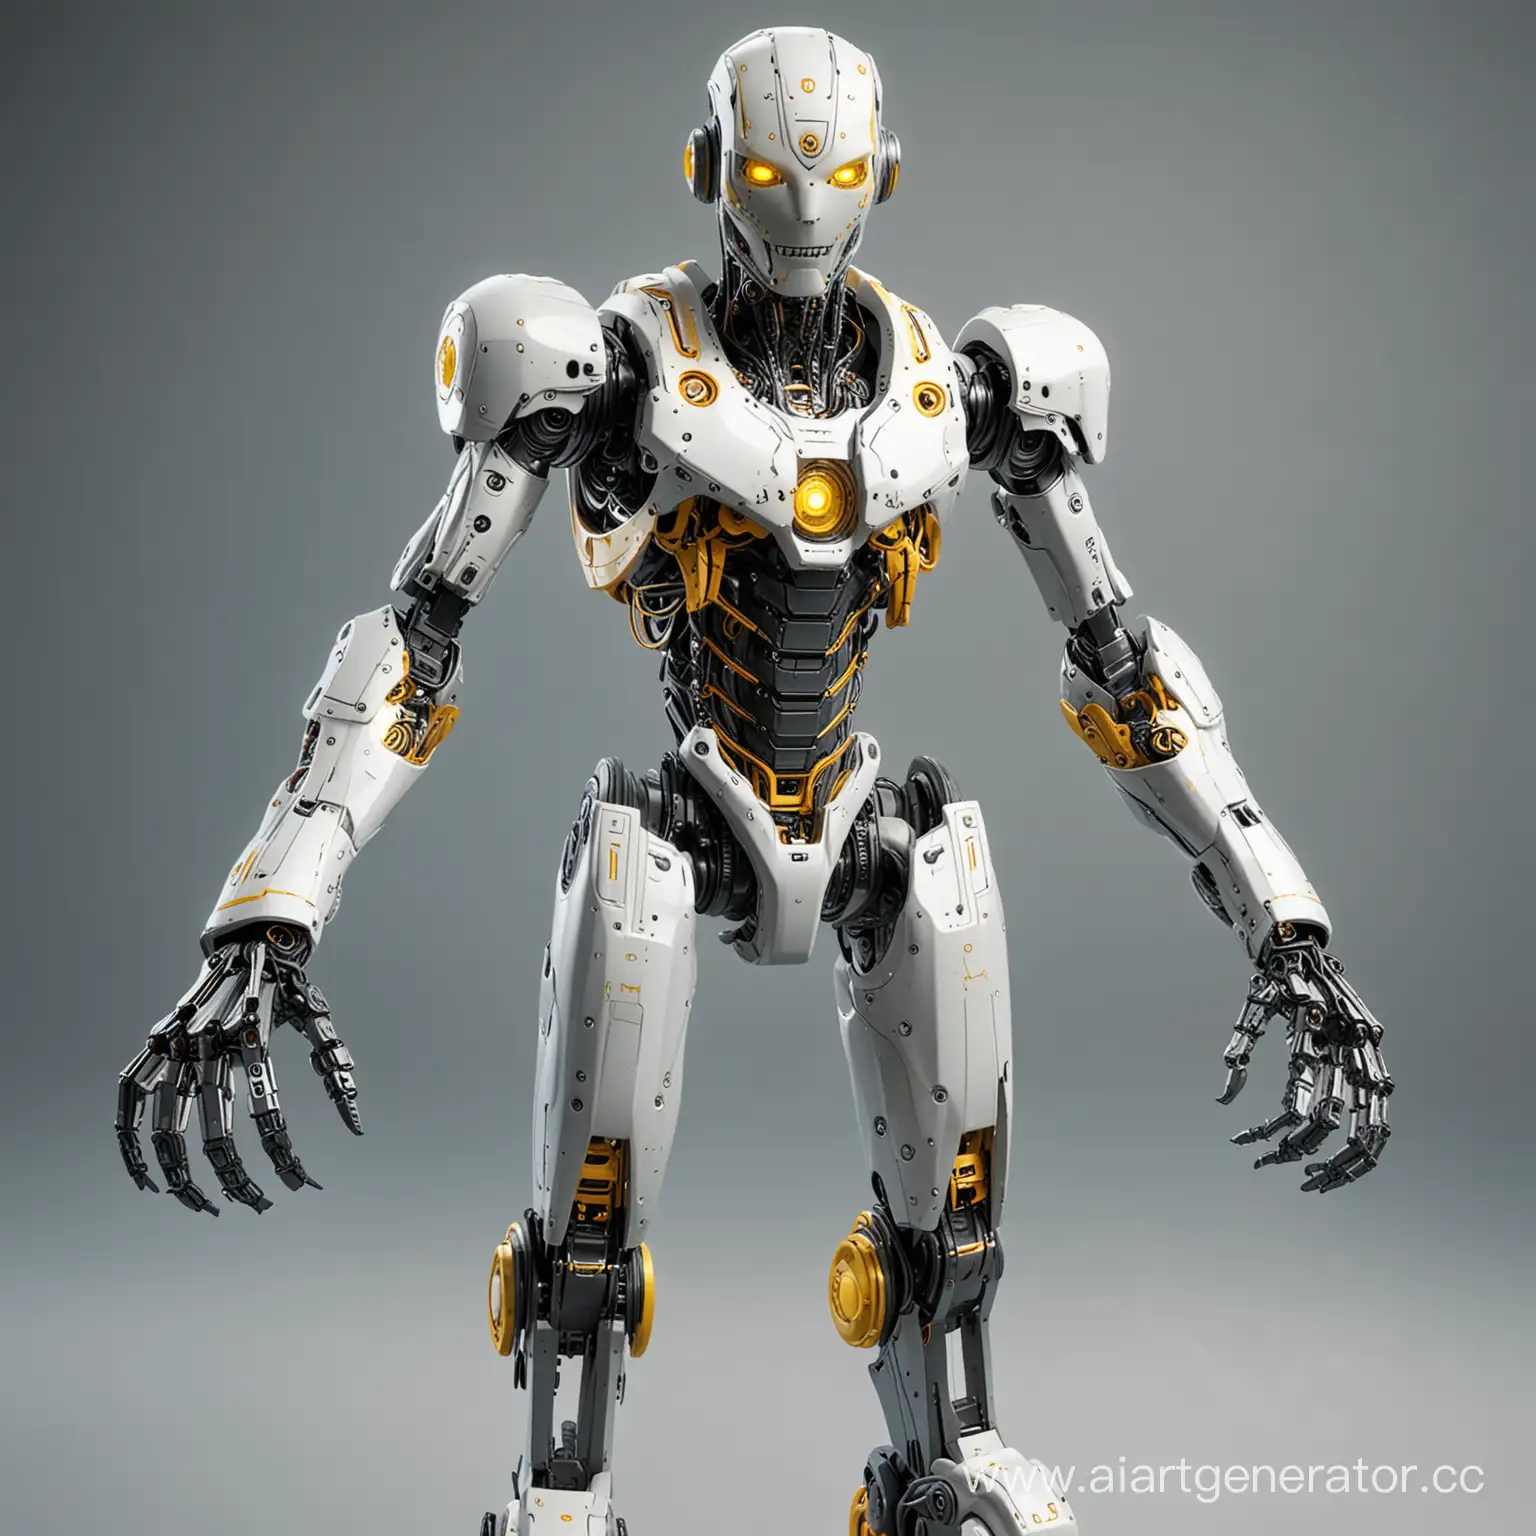 Towering-Robot-with-Piercing-Yellow-Eyes-and-Extended-Arms